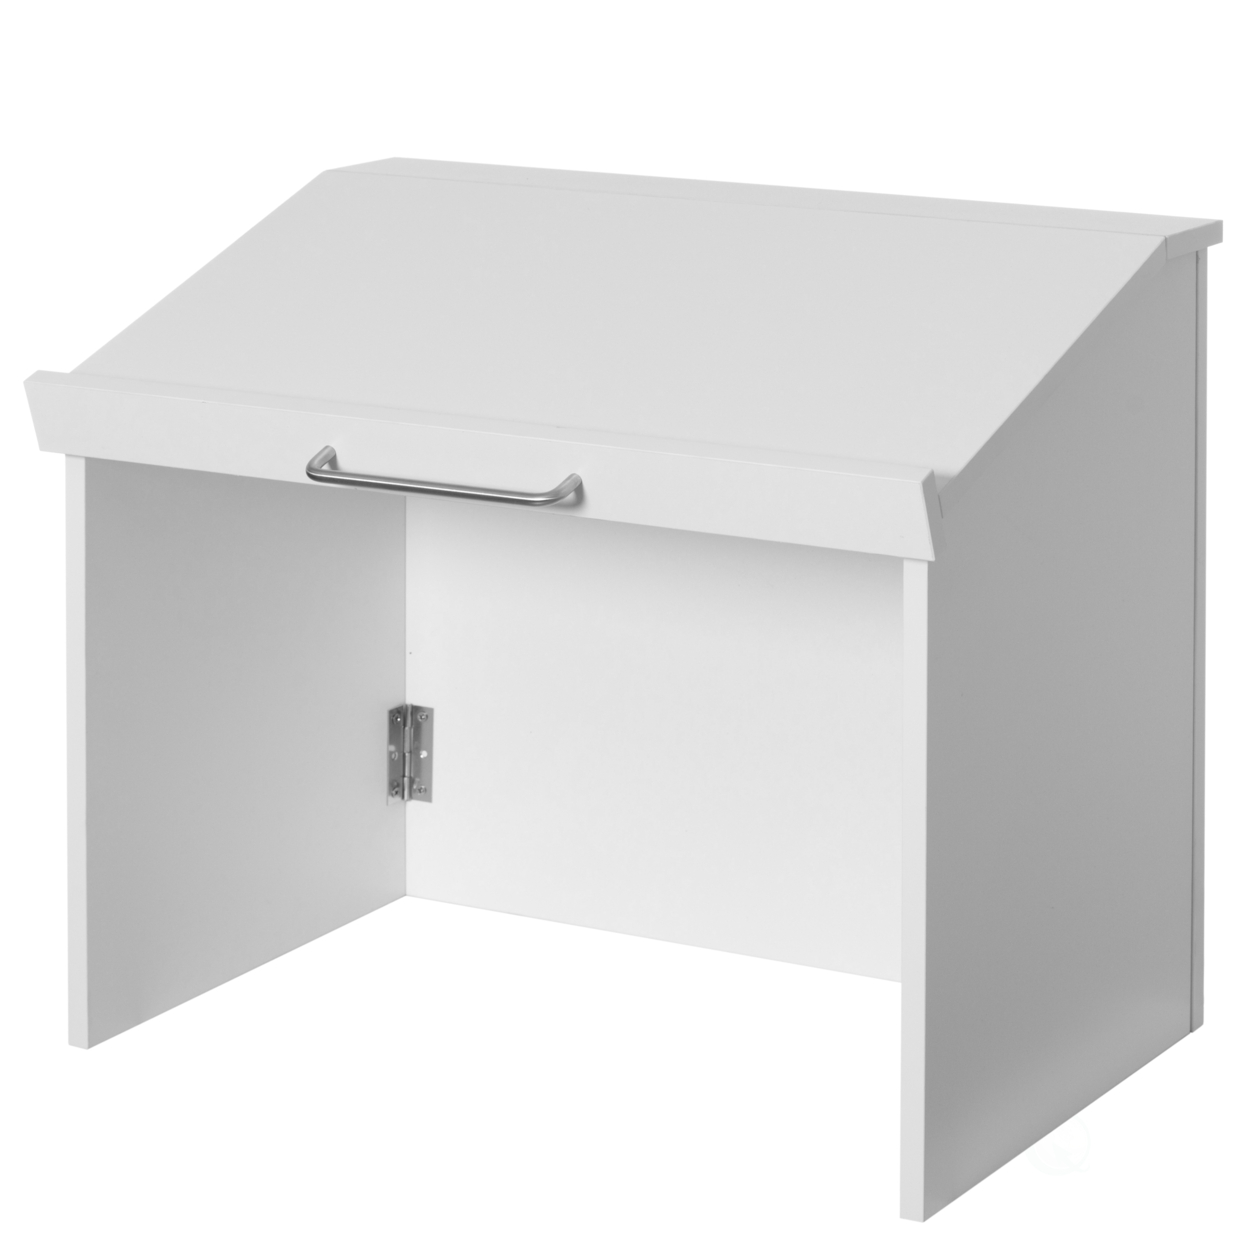 Foldable Tabletop Portable Podium, for Church, School, Office, or Home - white